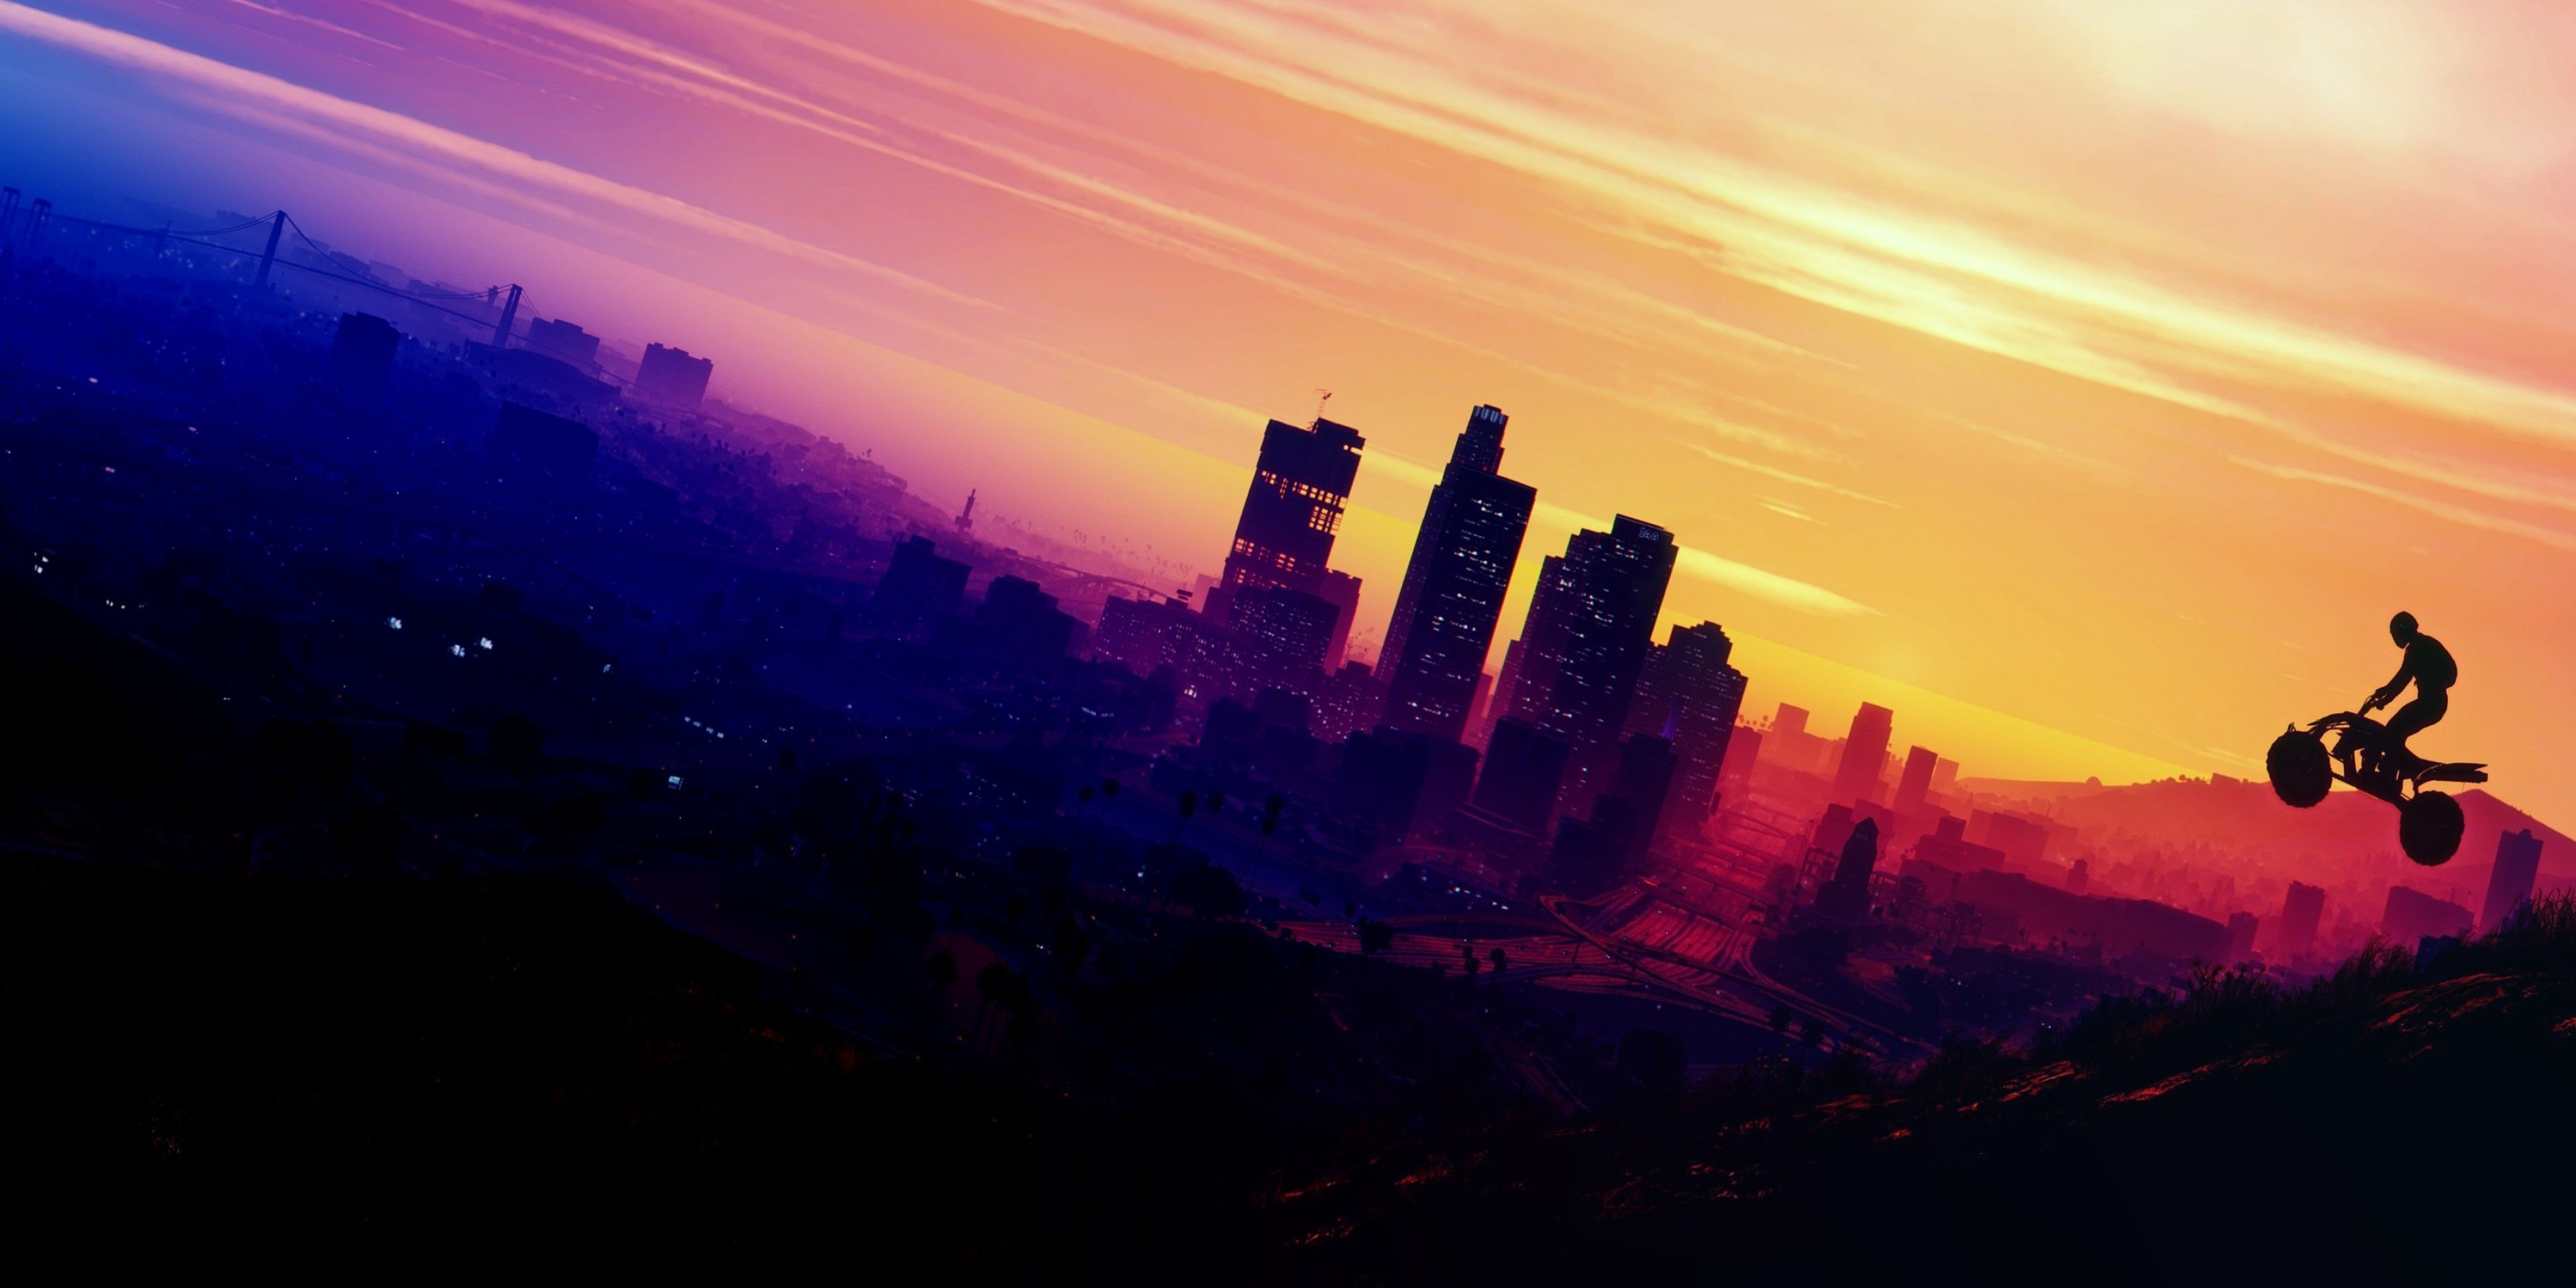 A person rides a bike as the sun sets over Los Santos in GTA 5